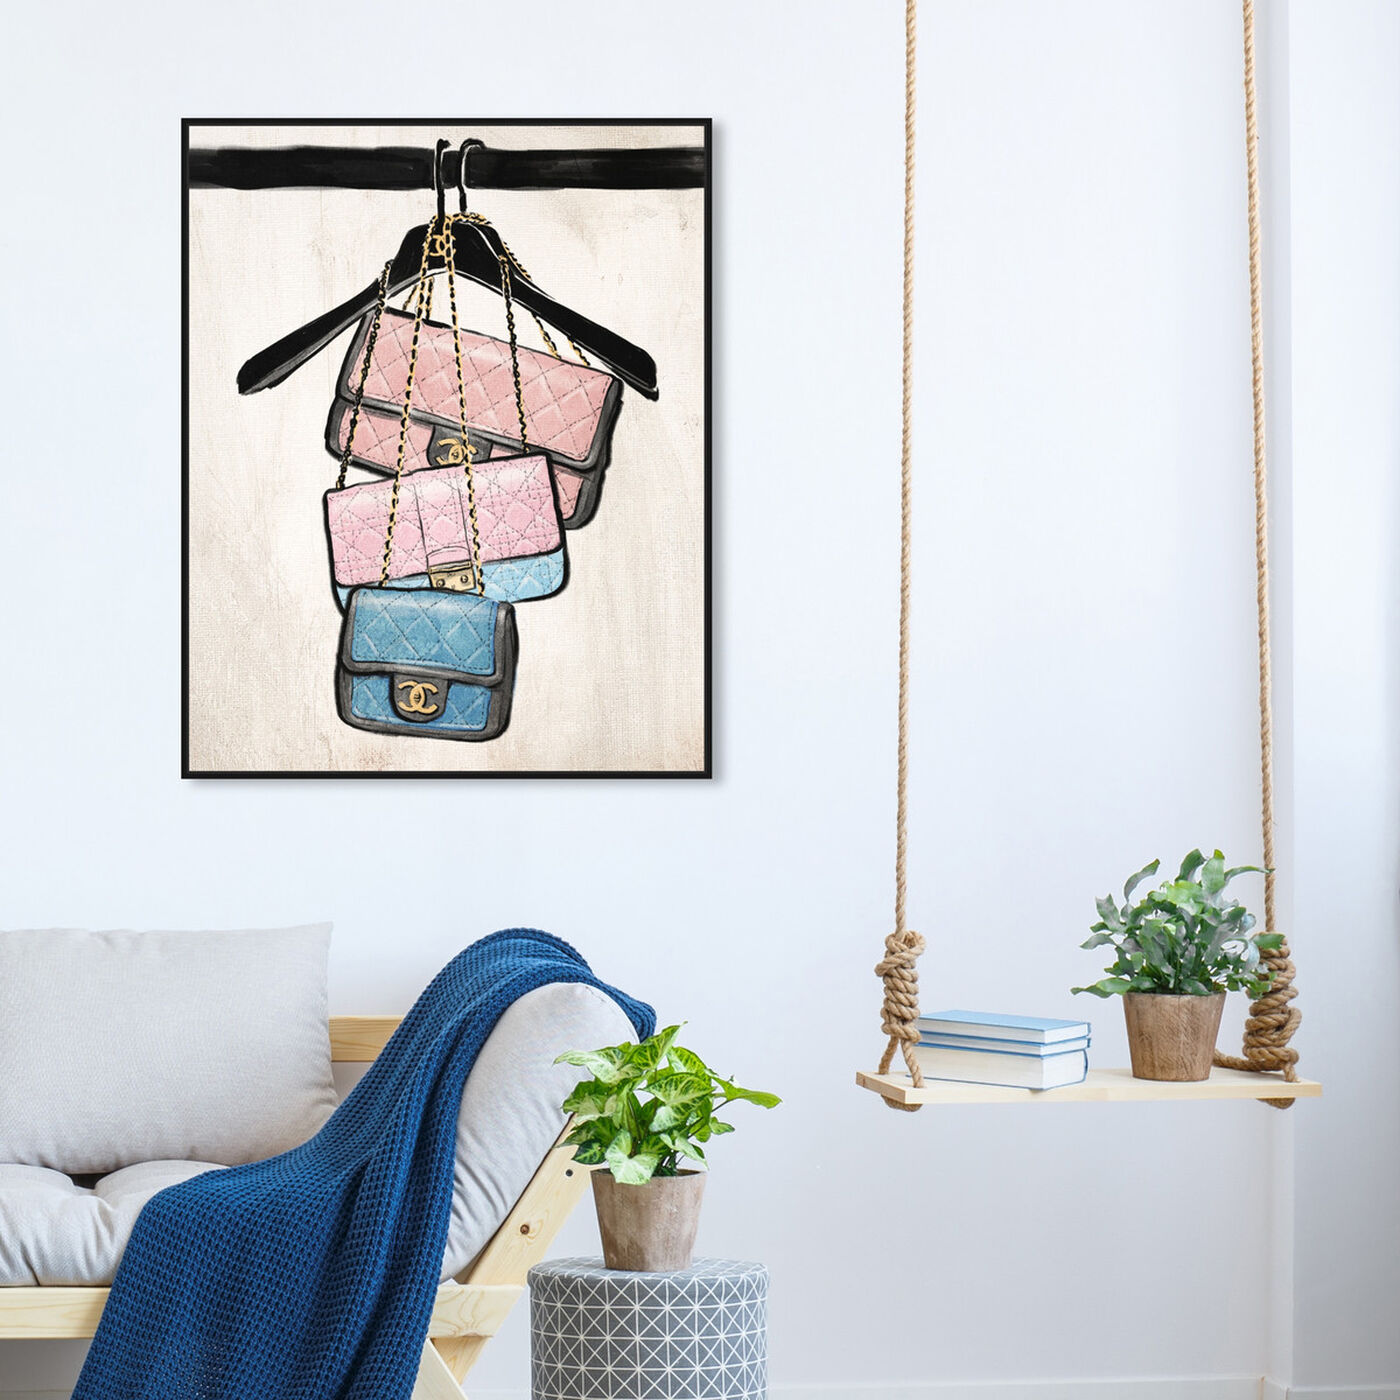 Hanging view of Closet Purses featuring fashion and glam and handbags art.